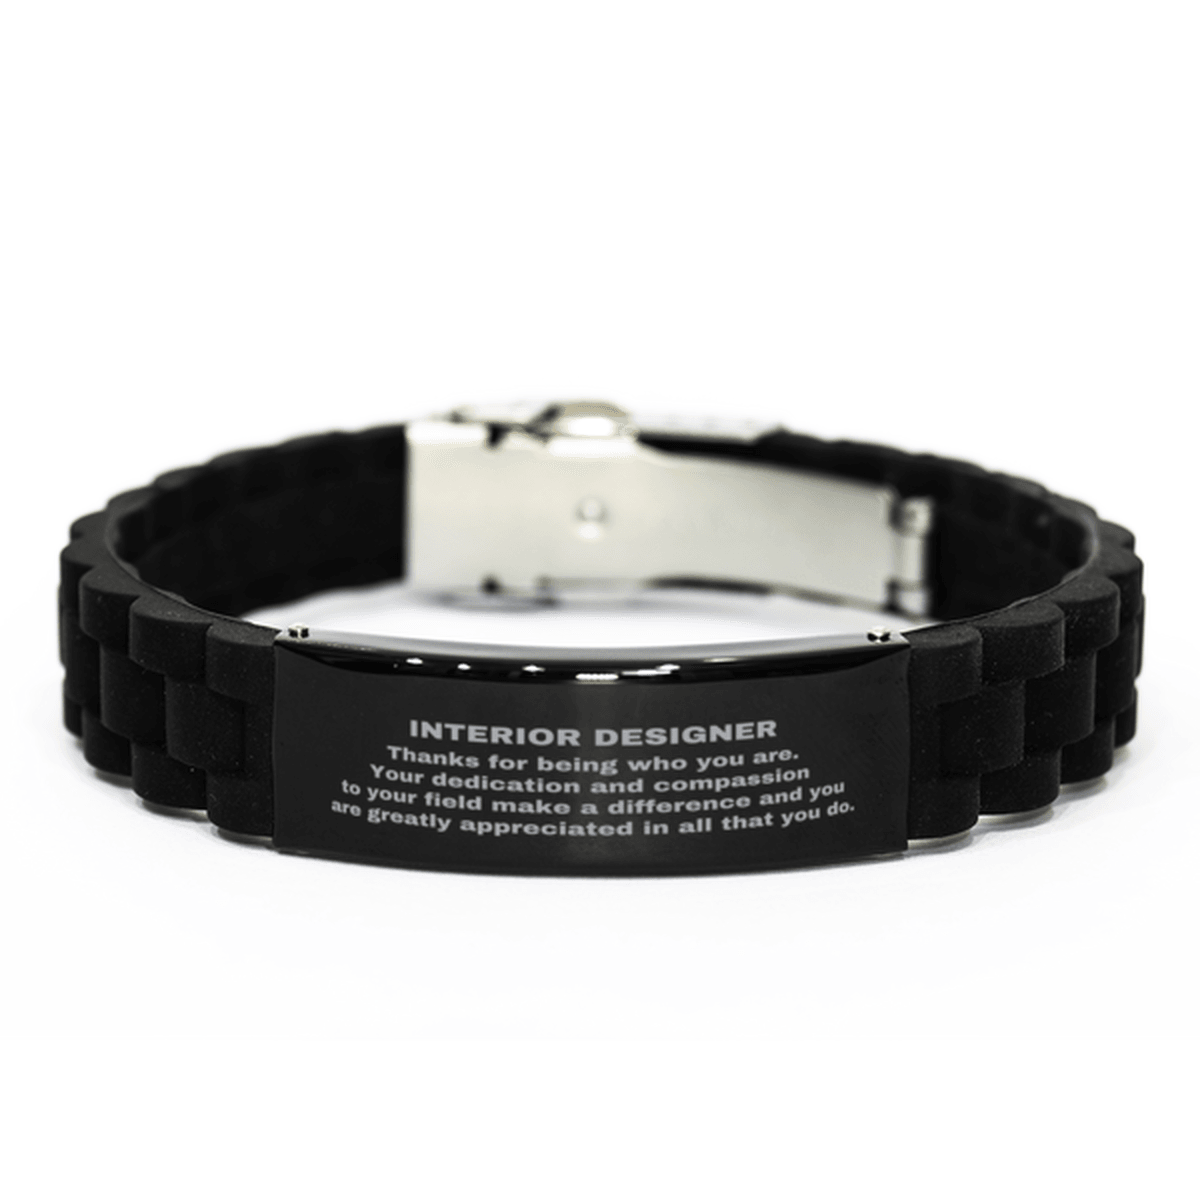 Interior Designer Black Glidelock Clasp Engraved Bracelet - Thanks for being who you are - Birthday Christmas Jewelry Gifts Coworkers Colleague Boss